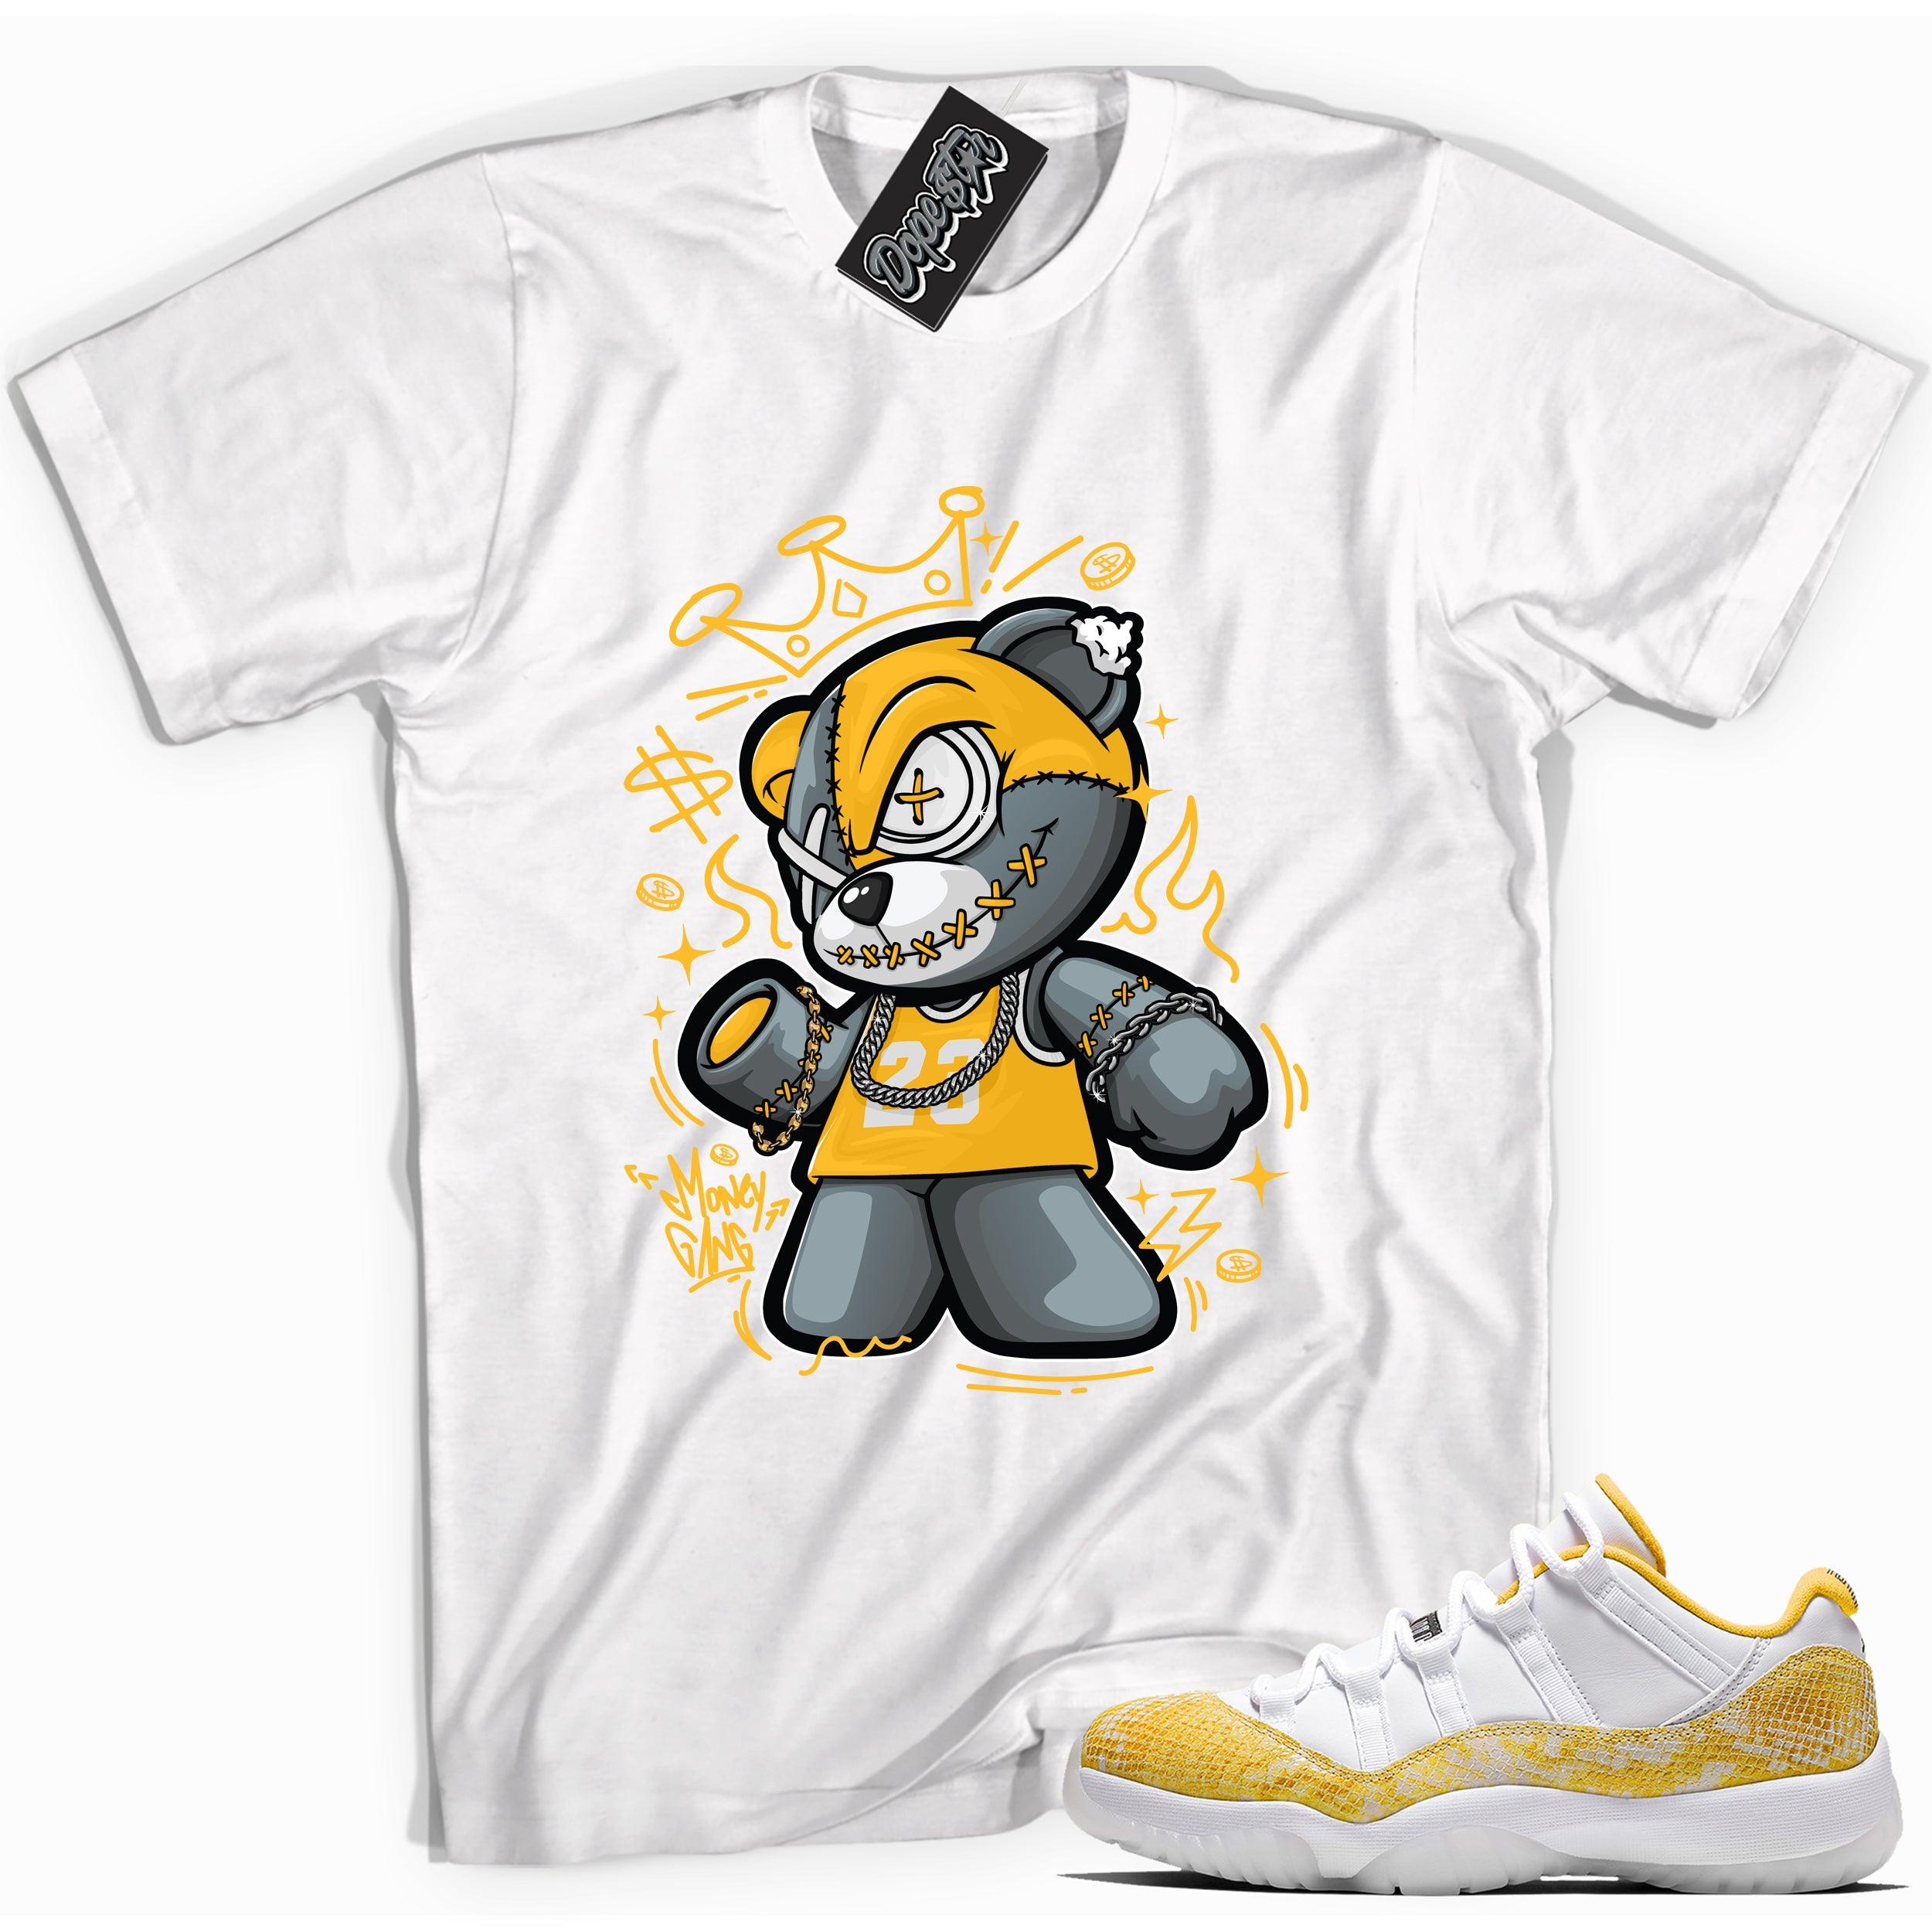 Cool white graphic tee with 'money gang bear' print, that perfectly matches Air Jordan 11 Retro Low Yellow Snakeskin sneakers